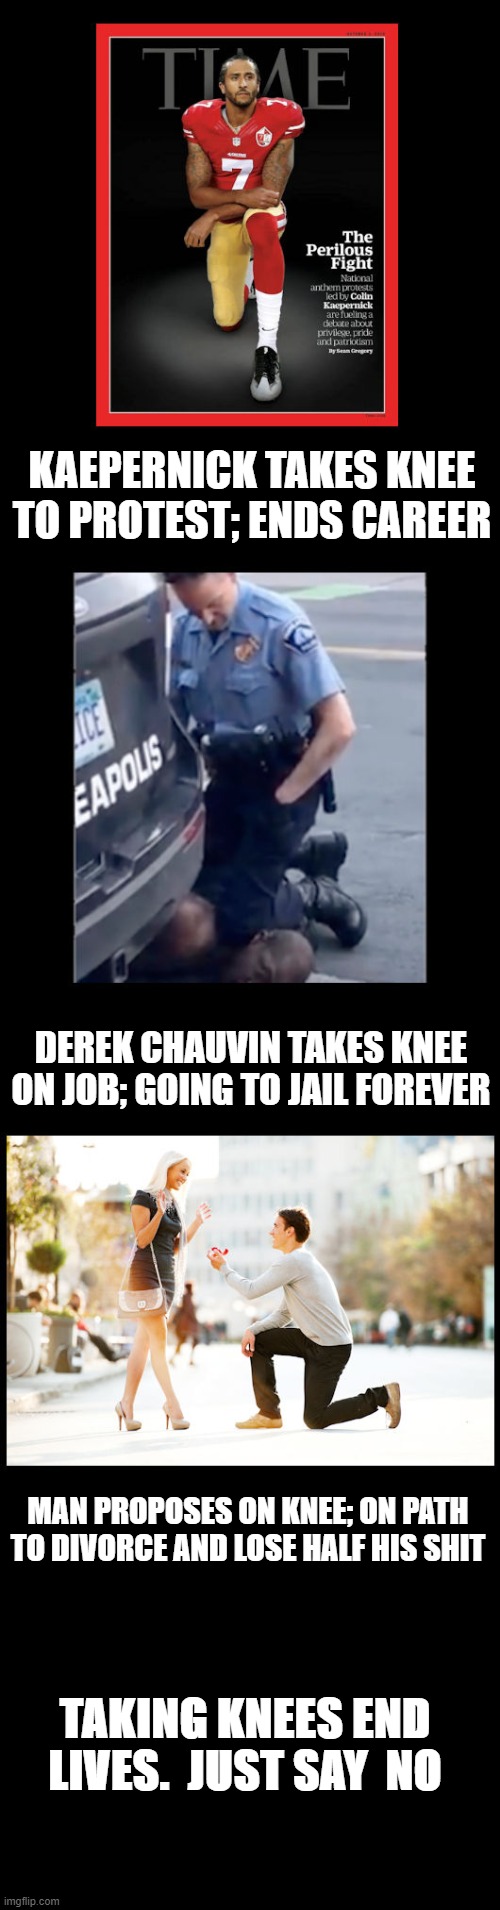 Just say no to taking a Knee | KAEPERNICK TAKES KNEE TO PROTEST; ENDS CAREER; DEREK CHAUVIN TAKES KNEE ON JOB; GOING TO JAIL FOREVER; MAN PROPOSES ON KNEE; ON PATH TO DIVORCE AND LOSE HALF HIS SHIT; TAKING KNEES END LIVES.  JUST SAY  NO | image tagged in taking a knee,marriage,colin kaepernick | made w/ Imgflip meme maker